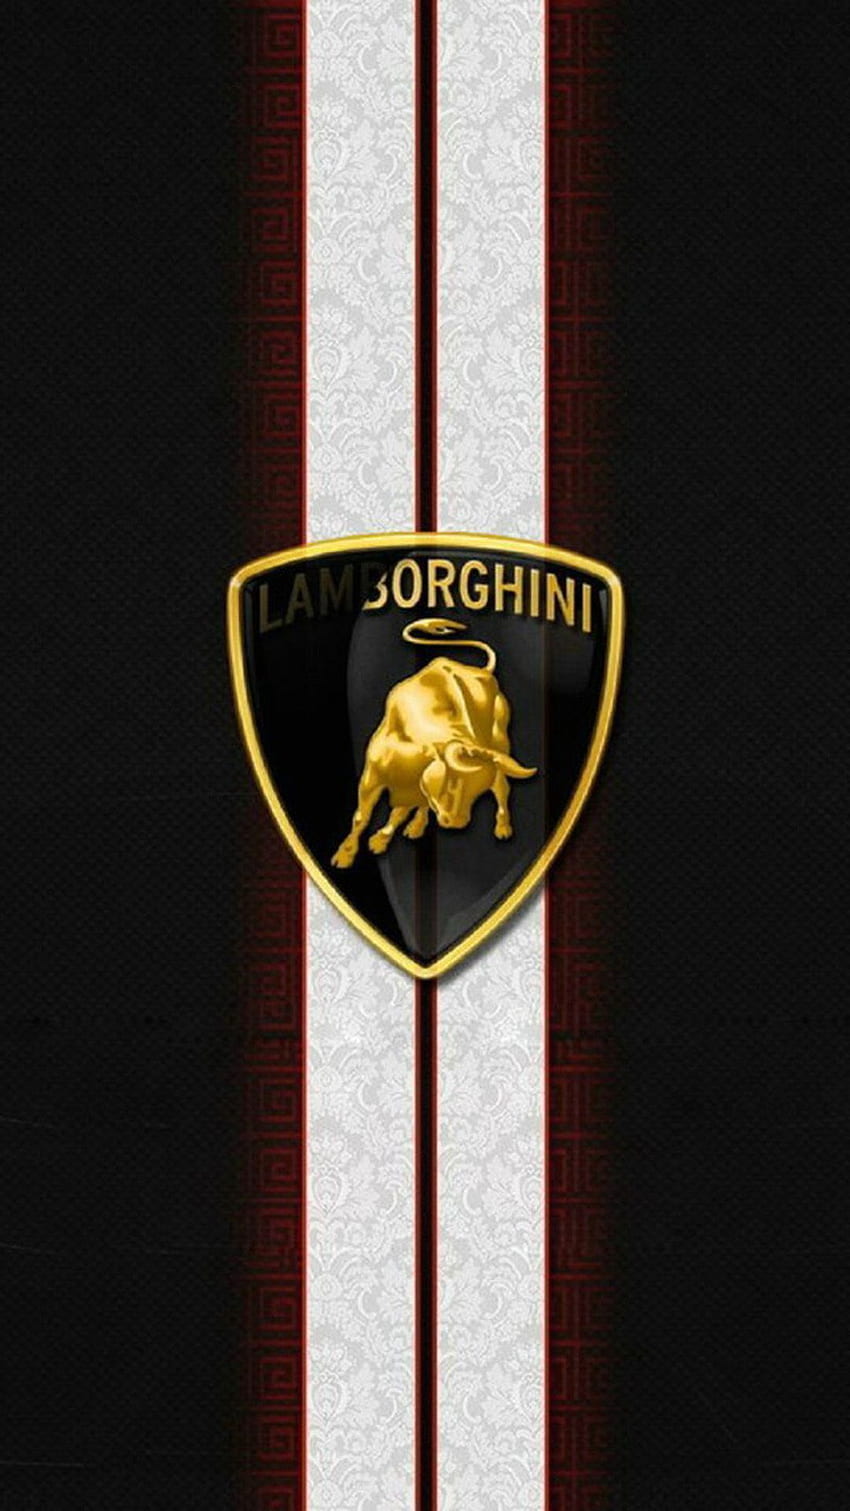 iPhone wallpaper musclecars muscle cars iphone wallpaper  Luxury car  logos Corvette Car wallpapers